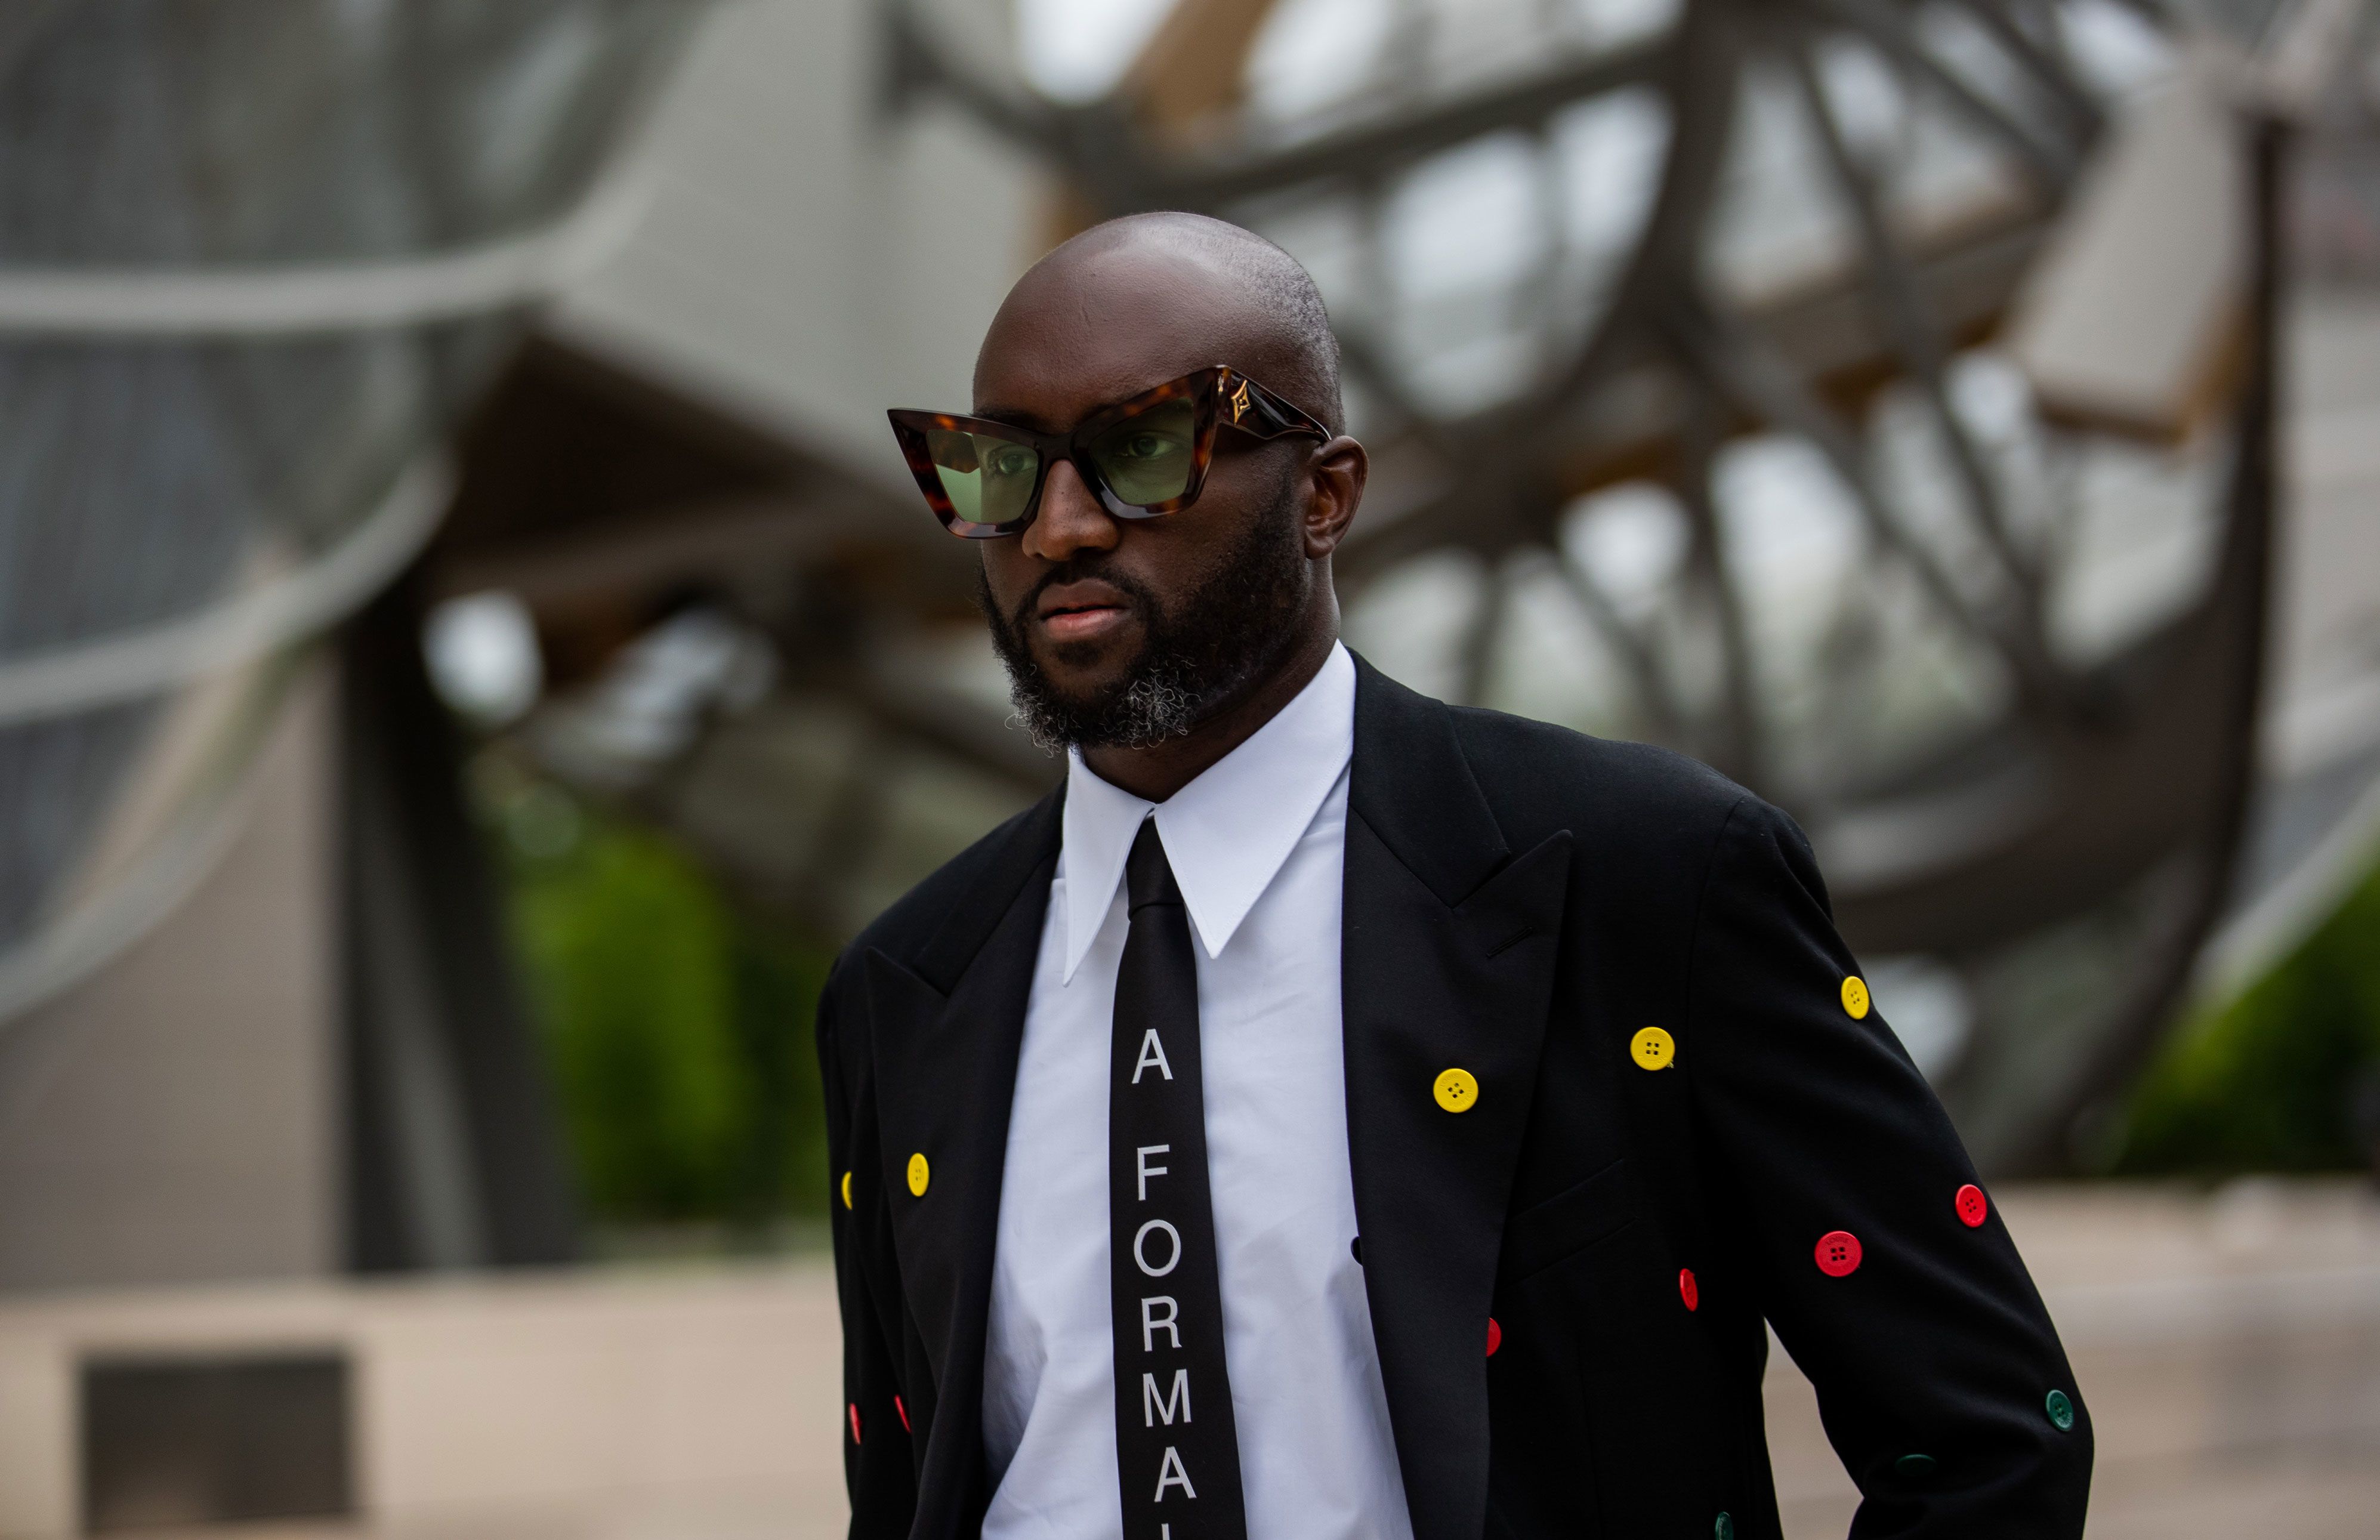 Virgil Abloh's Nike x Louis Vuitton sneakers sold for combined USD